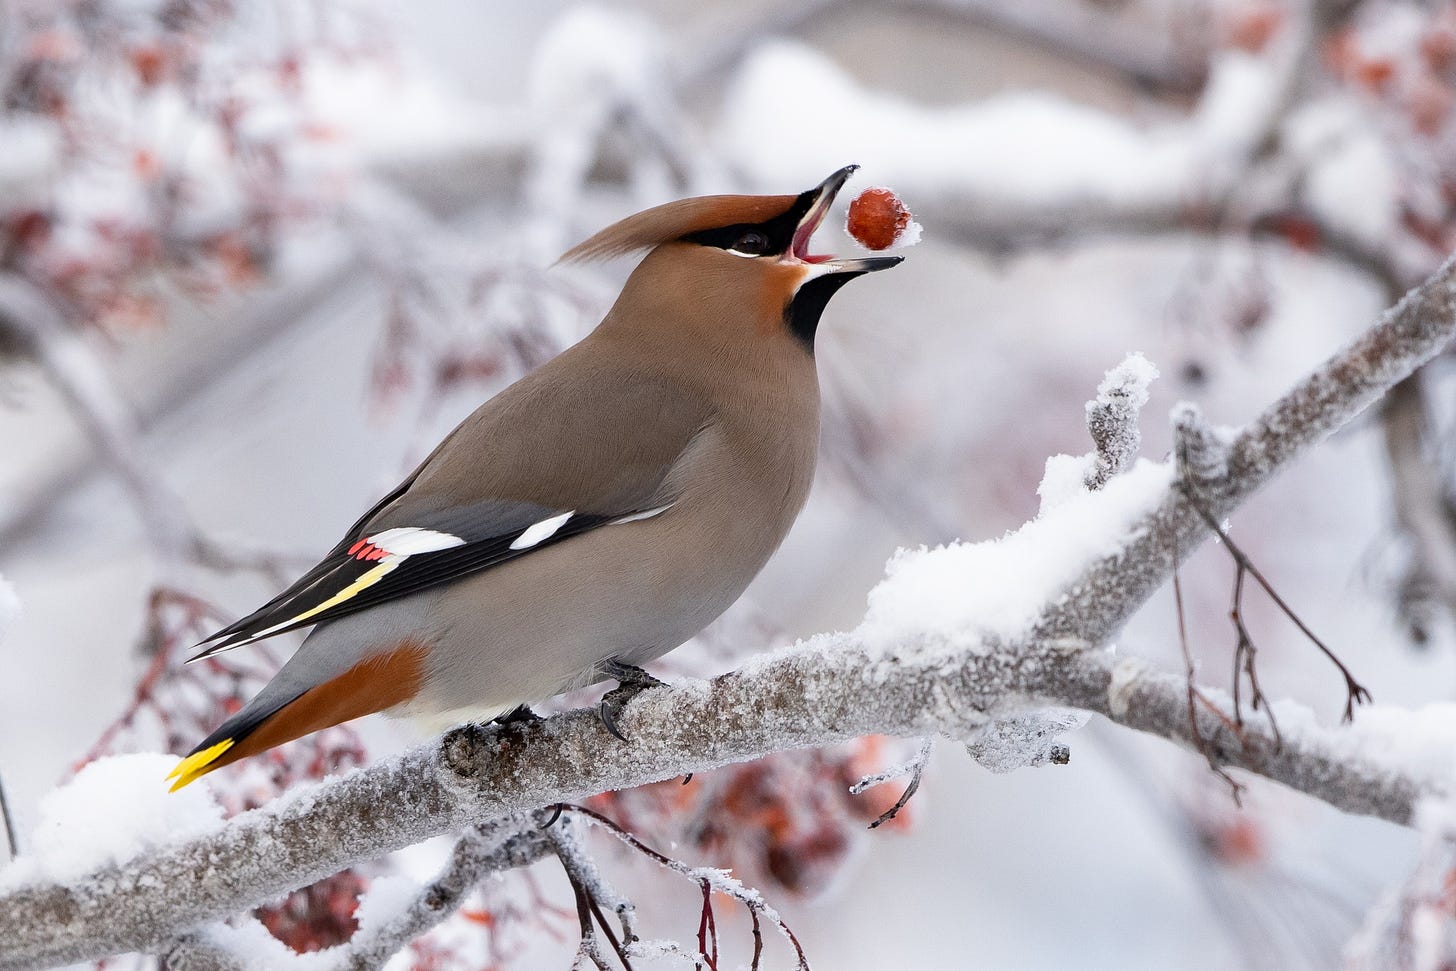 A Bohemian waxwing eating a berry from a snowy branch 